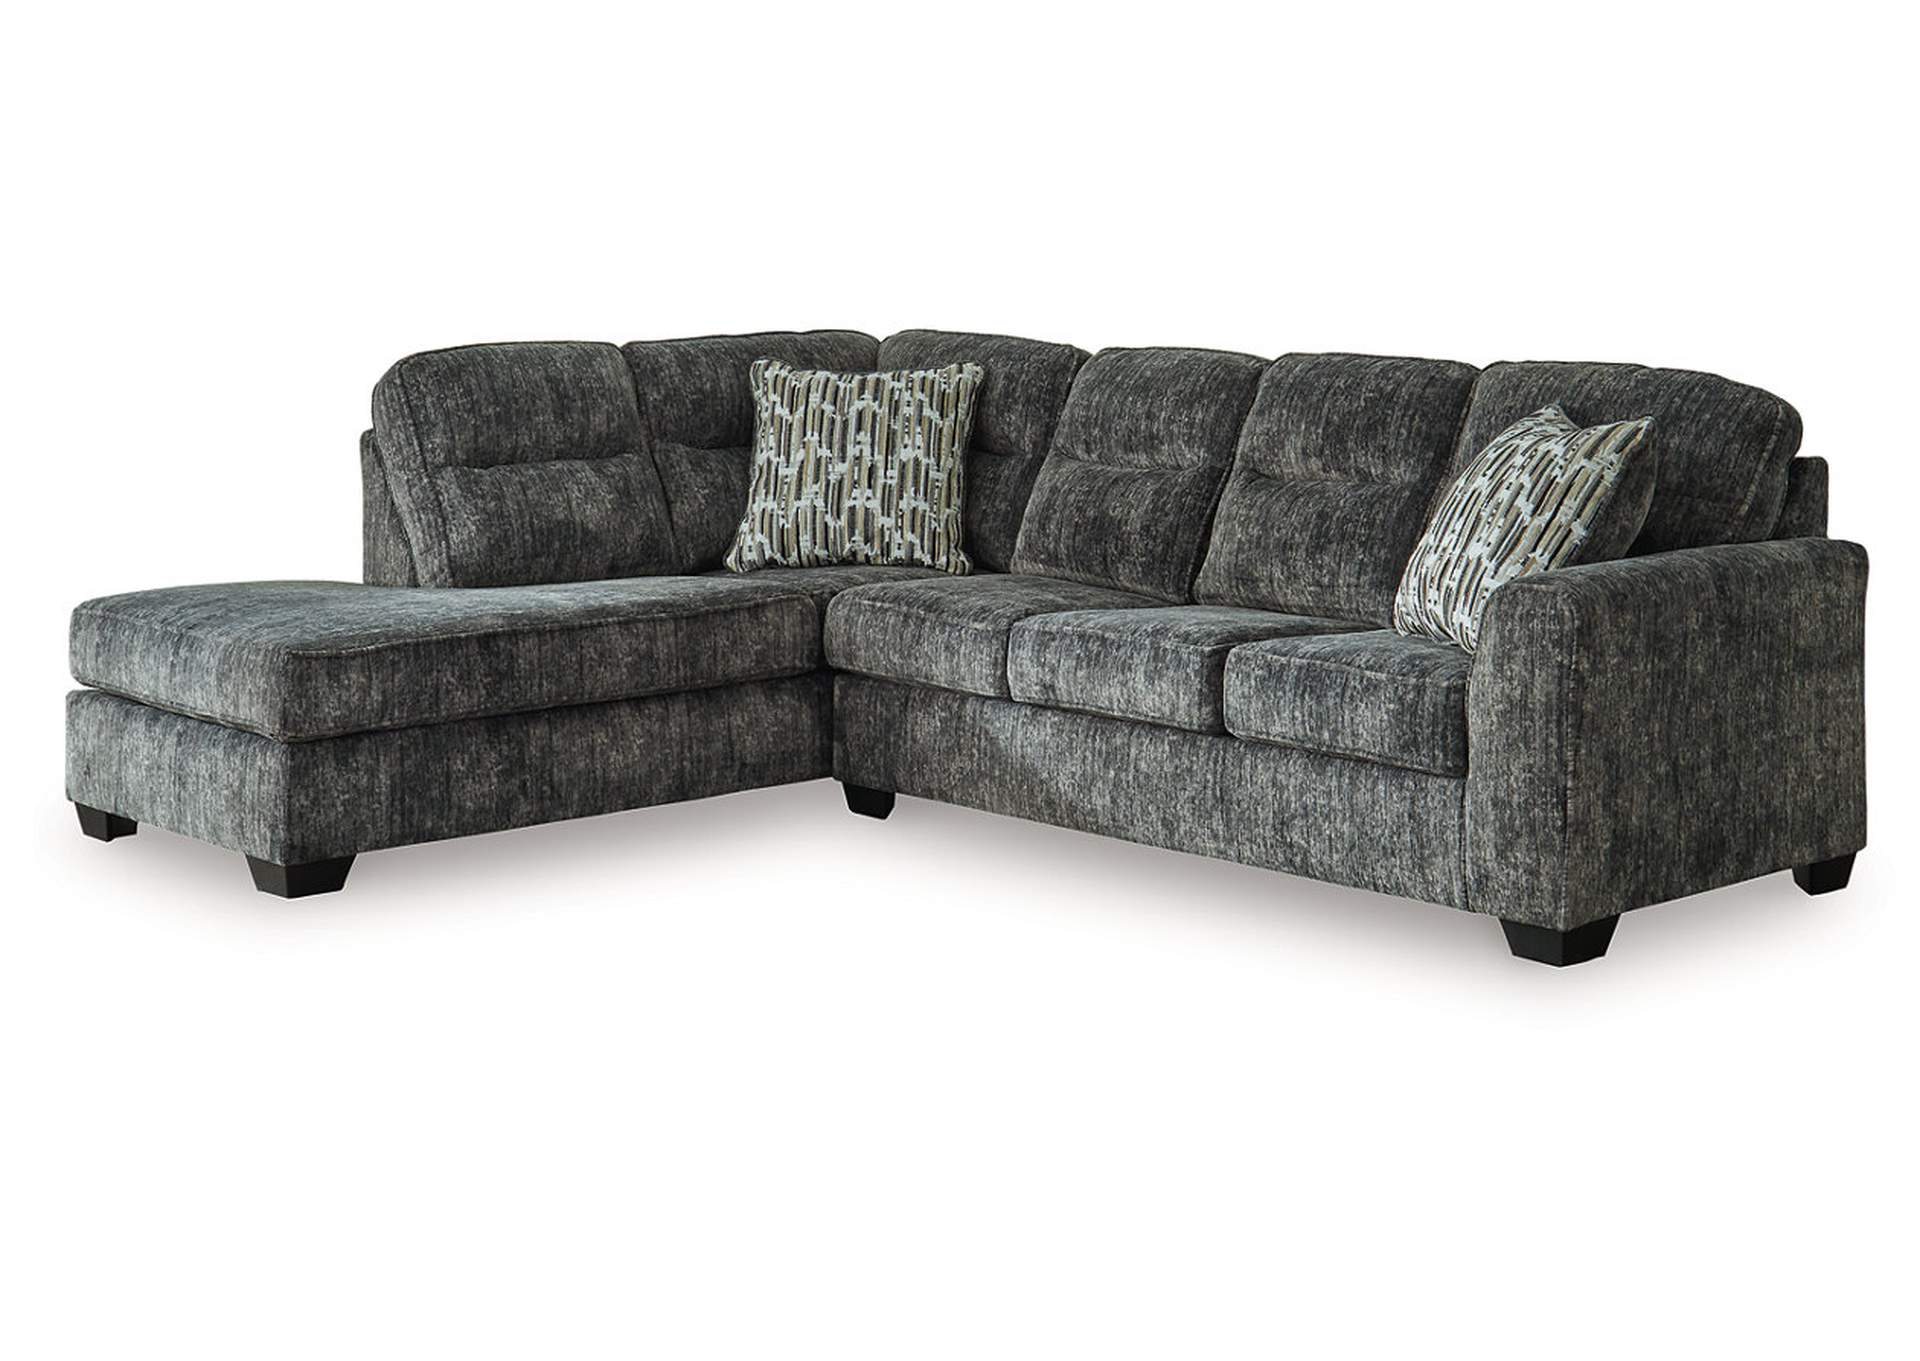 Lonoke 2-Piece Sectional with Chaise,Signature Design By Ashley